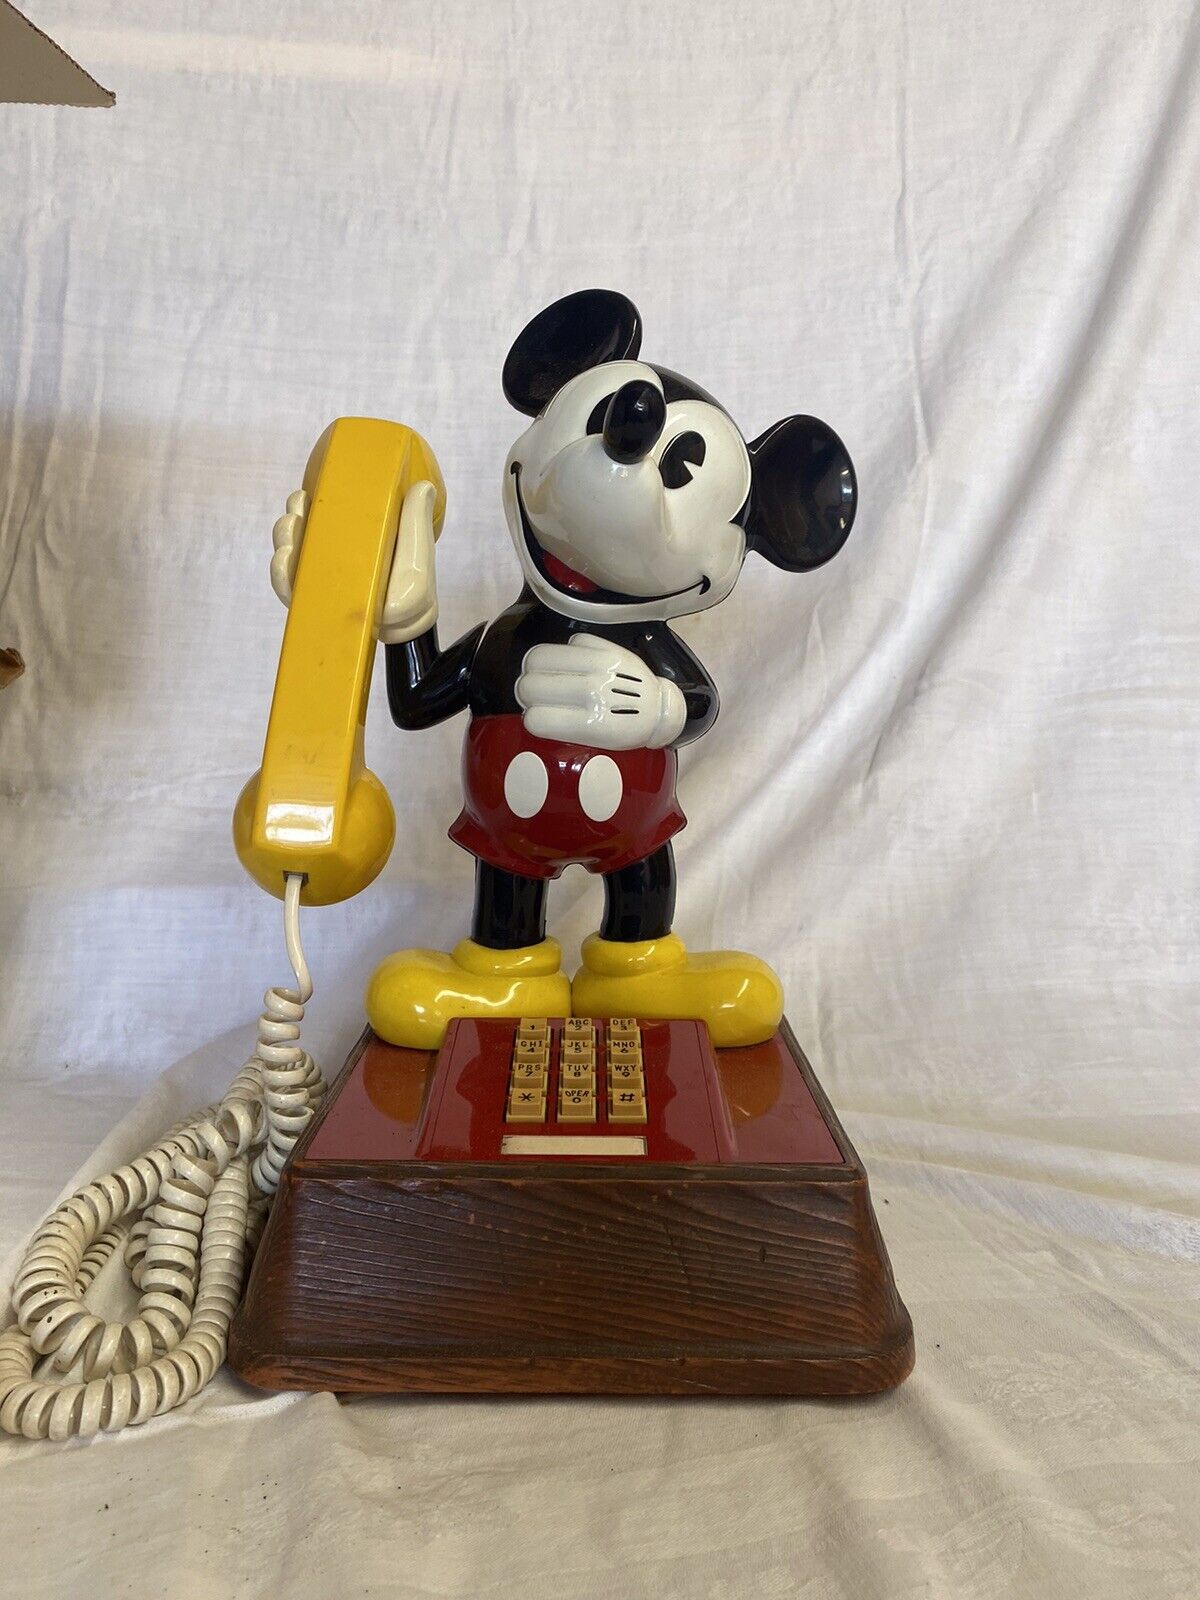 Vintage 1976 Mickey Mouse Telephone - Good Condition, With The Box